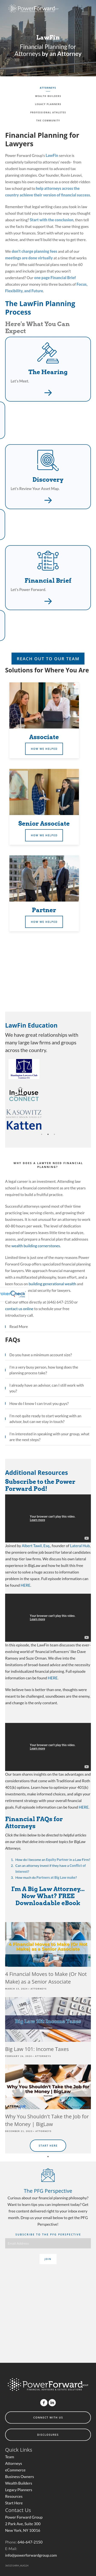 Financial Planning For Attorneys - New York NY Lawyers